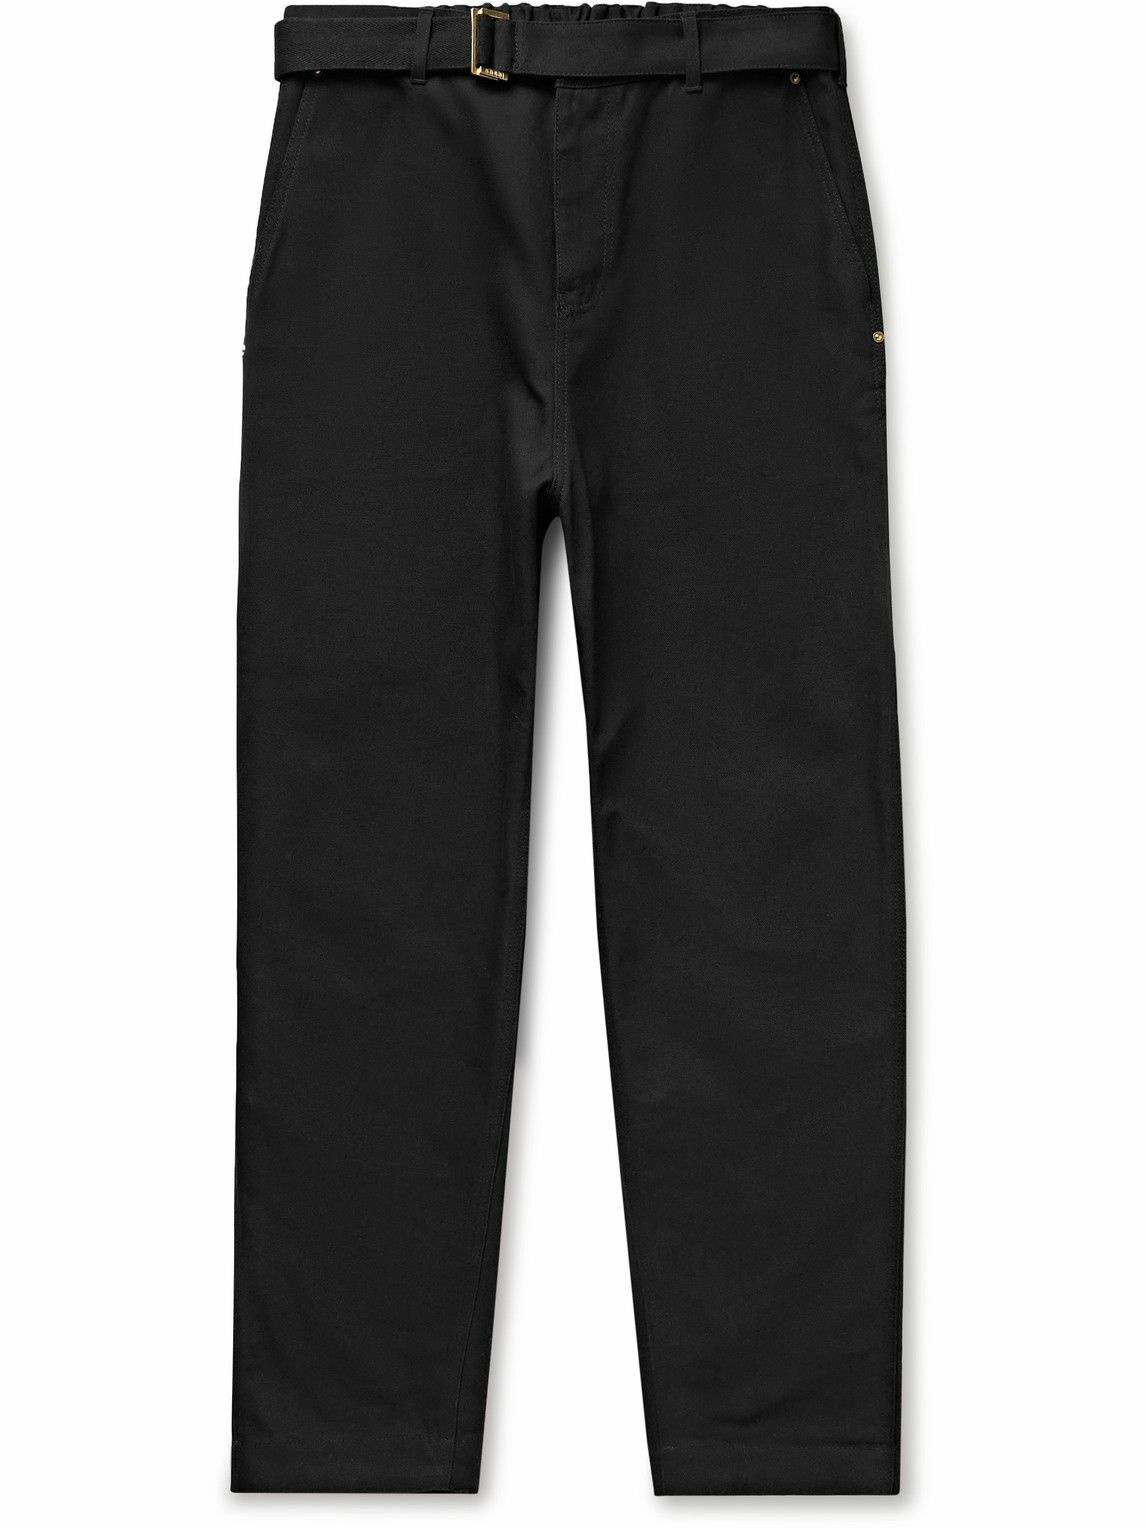 Sacai - Carhartt WIP Slim-Fit Belted Cotton-Canvas Trousers - Black